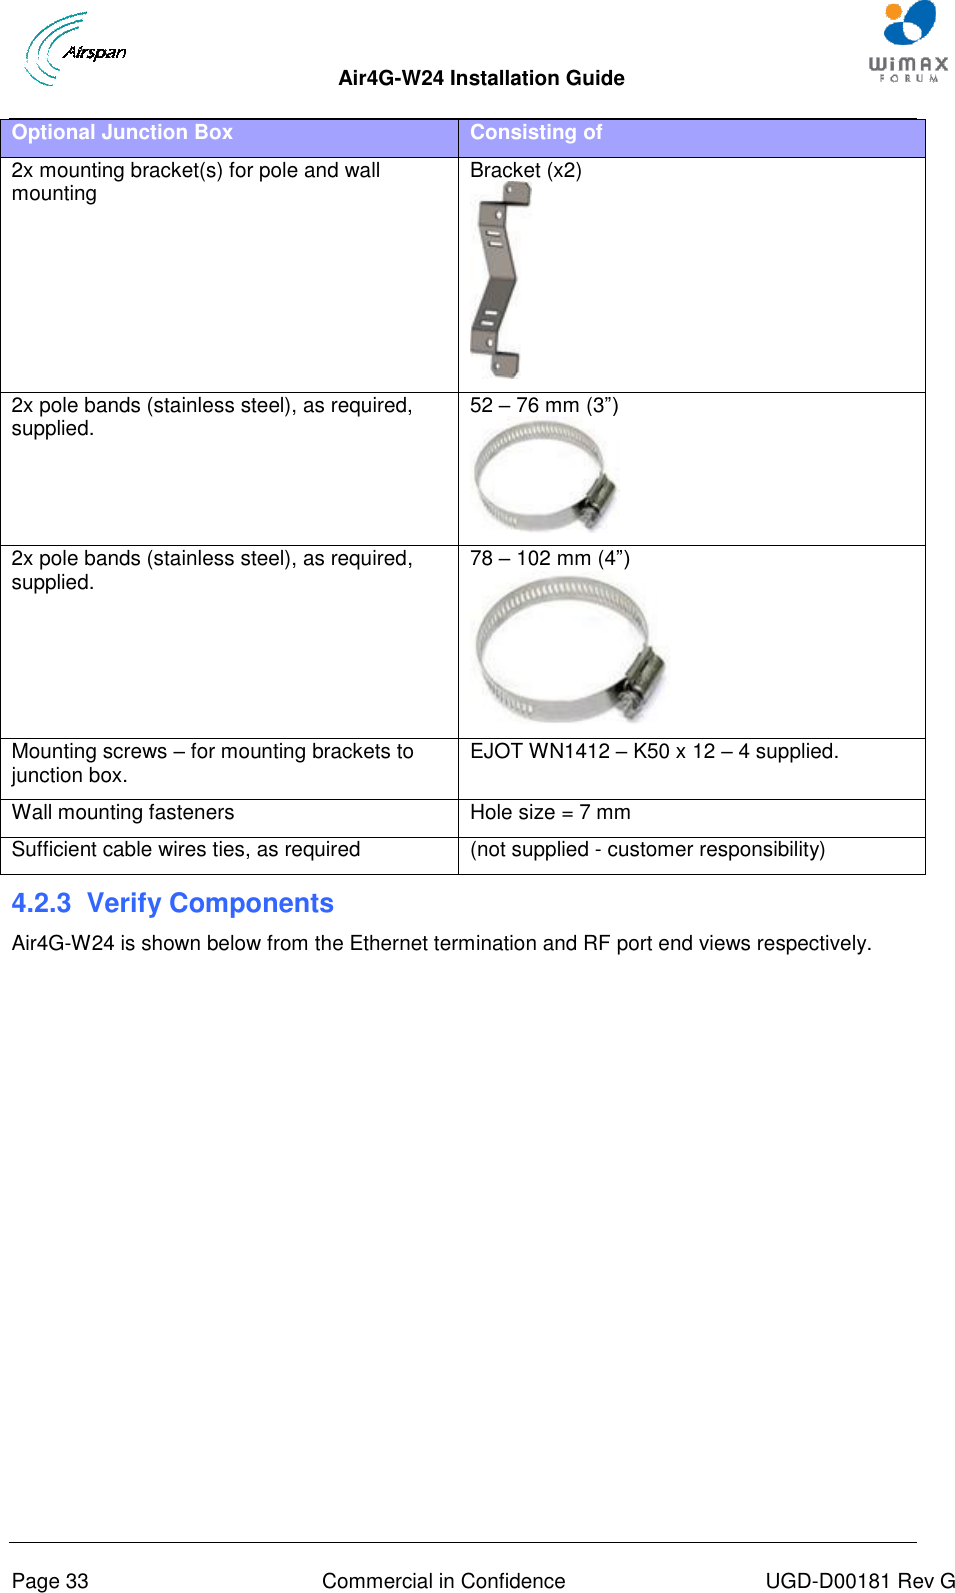  Air4G-W24 Installation Guide     Page 33  Commercial in Confidence  UGD-D00181 Rev G Optional Junction Box Consisting of 2x mounting bracket(s) for pole and wall mounting Bracket (x2)  2x pole bands (stainless steel), as required, supplied. 52 – 76 mm (3”)  2x pole bands (stainless steel), as required, supplied. 78 – 102 mm (4”)  Mounting screws – for mounting brackets to junction box. EJOT WN1412 – K50 x 12 – 4 supplied. Wall mounting fasteners  Hole size = 7 mm  Sufficient cable wires ties, as required (not supplied - customer responsibility) 4.2.3  Verify Components Air4G-W24 is shown below from the Ethernet termination and RF port end views respectively. 